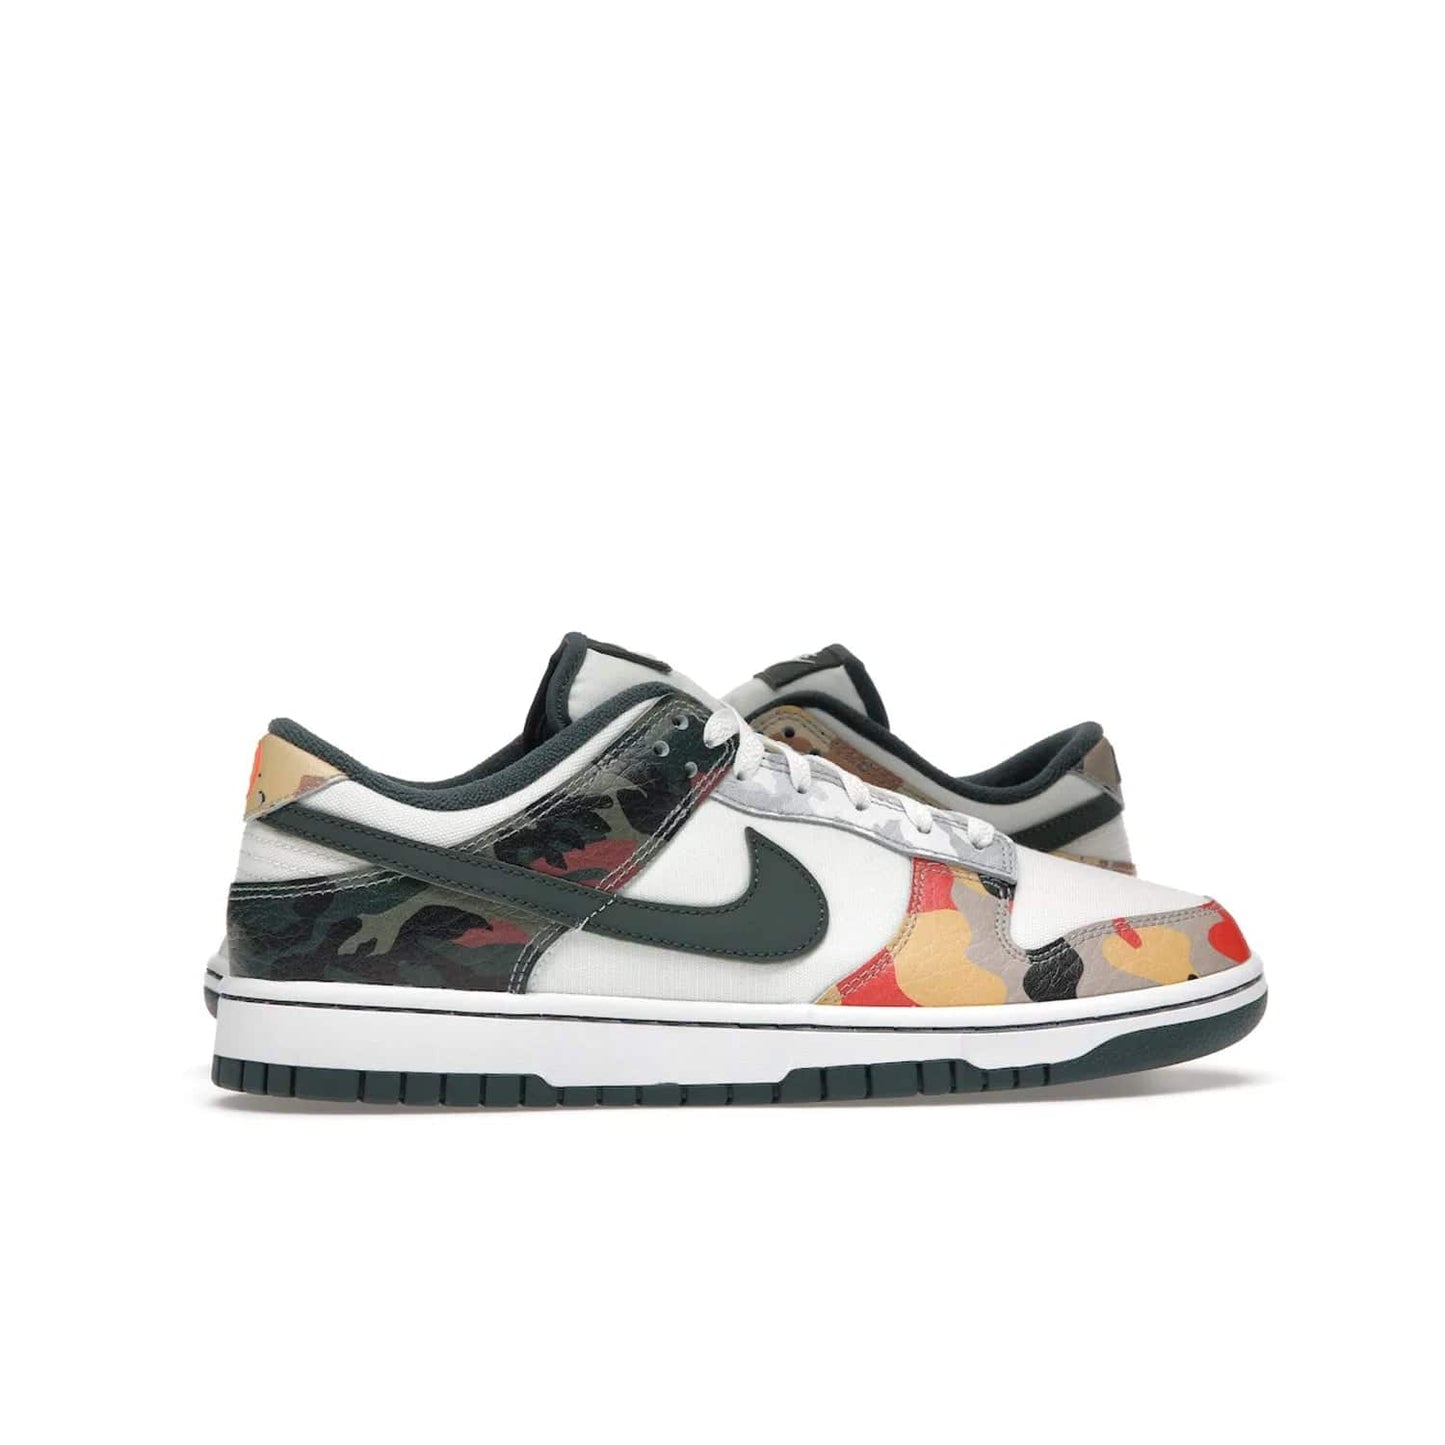 Nike Dunk Low SE Sail Multi-Camo - Image 36 - Only at www.BallersClubKickz.com - Classic design meets statement style in the Nike Dunk Low SE Sail Multi-Camo. White leather base with multi-color camo overlays, vibrant Nike Swooshes, and orange Nike embroidery. Get yours August 2021.